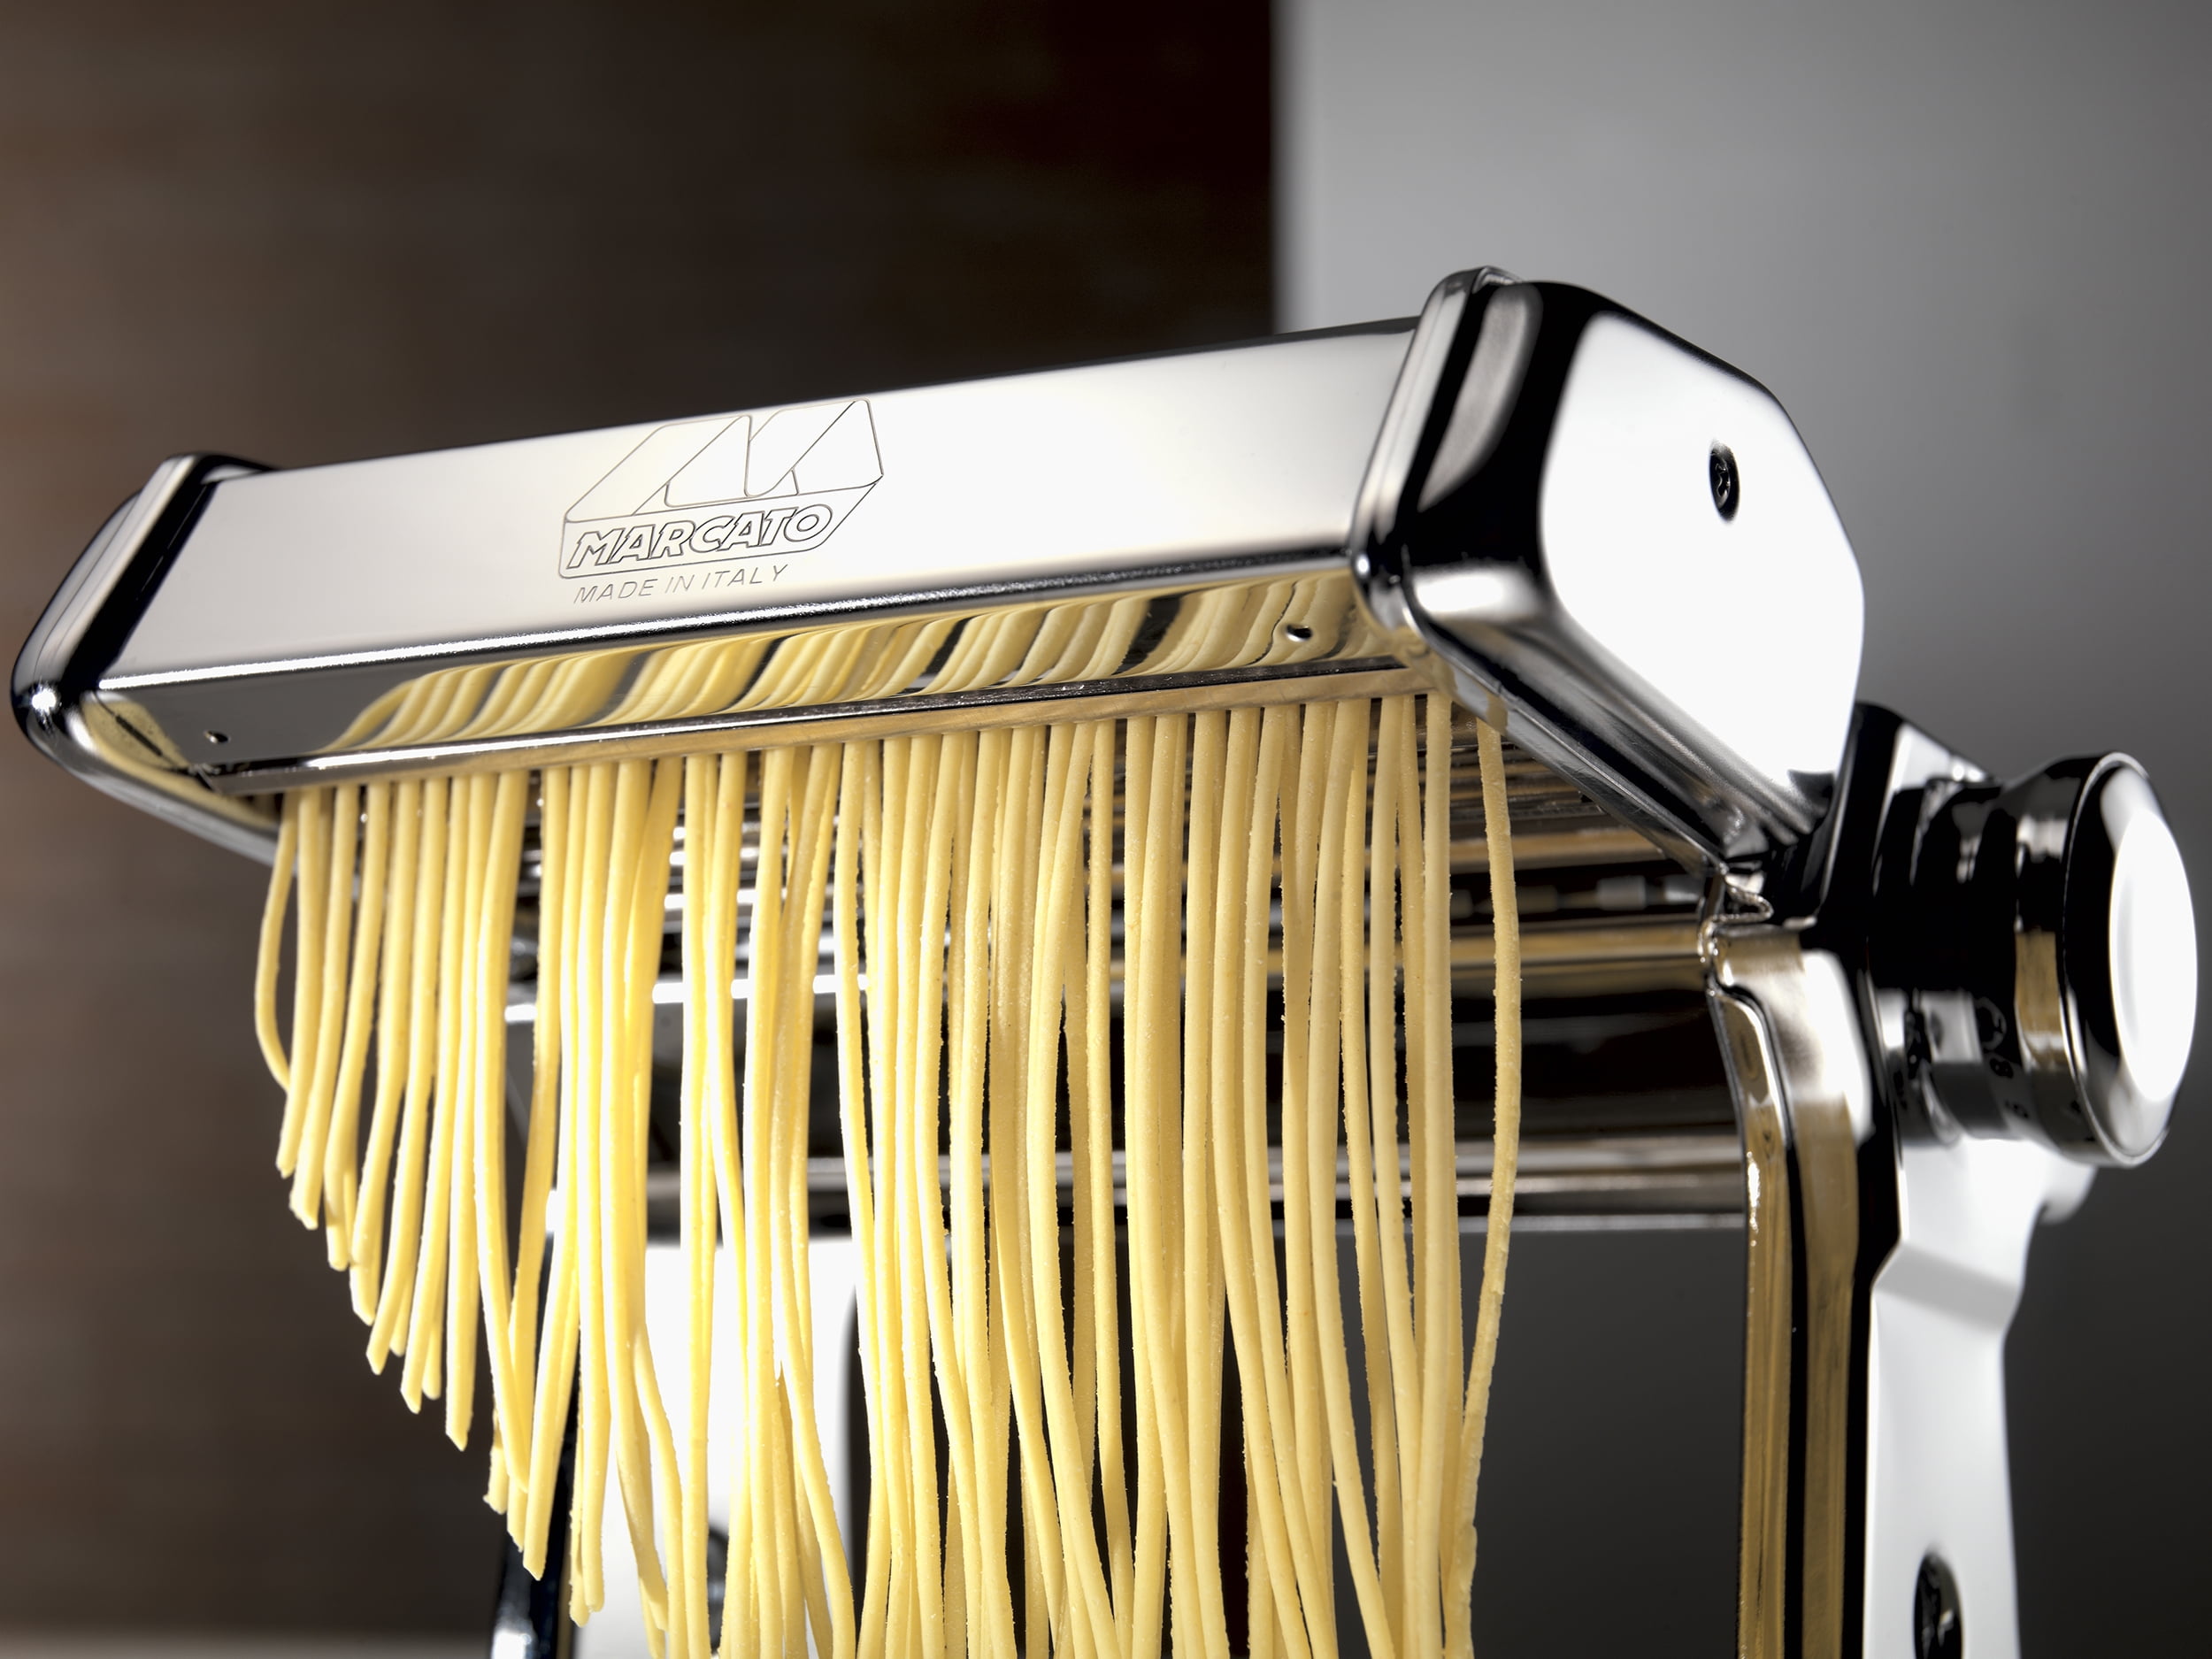  Marcato Pappardelle Attachment, Works with Pasta Machine